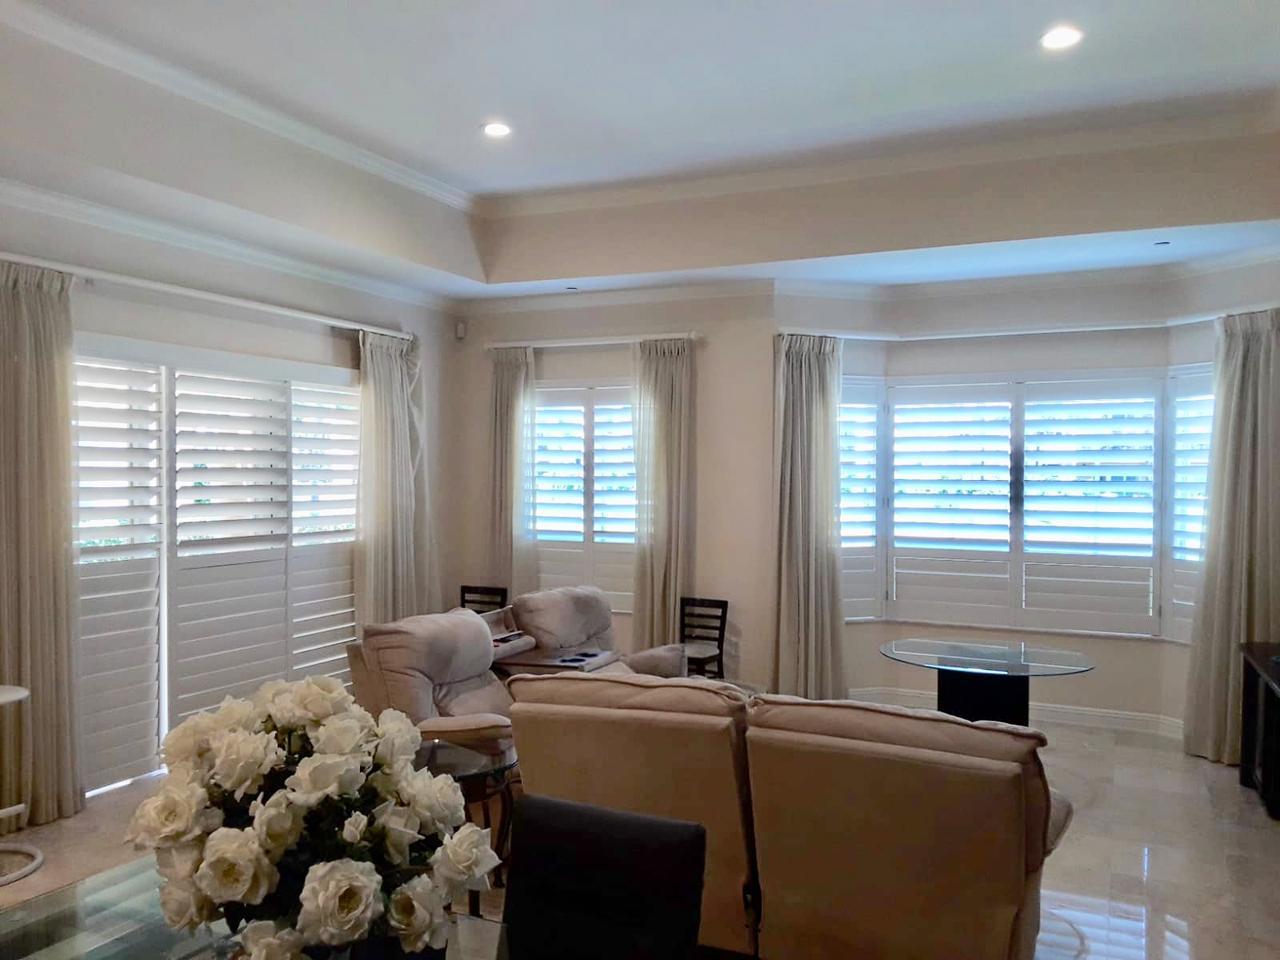 Sliding glass doors and bay window with plantation shutters